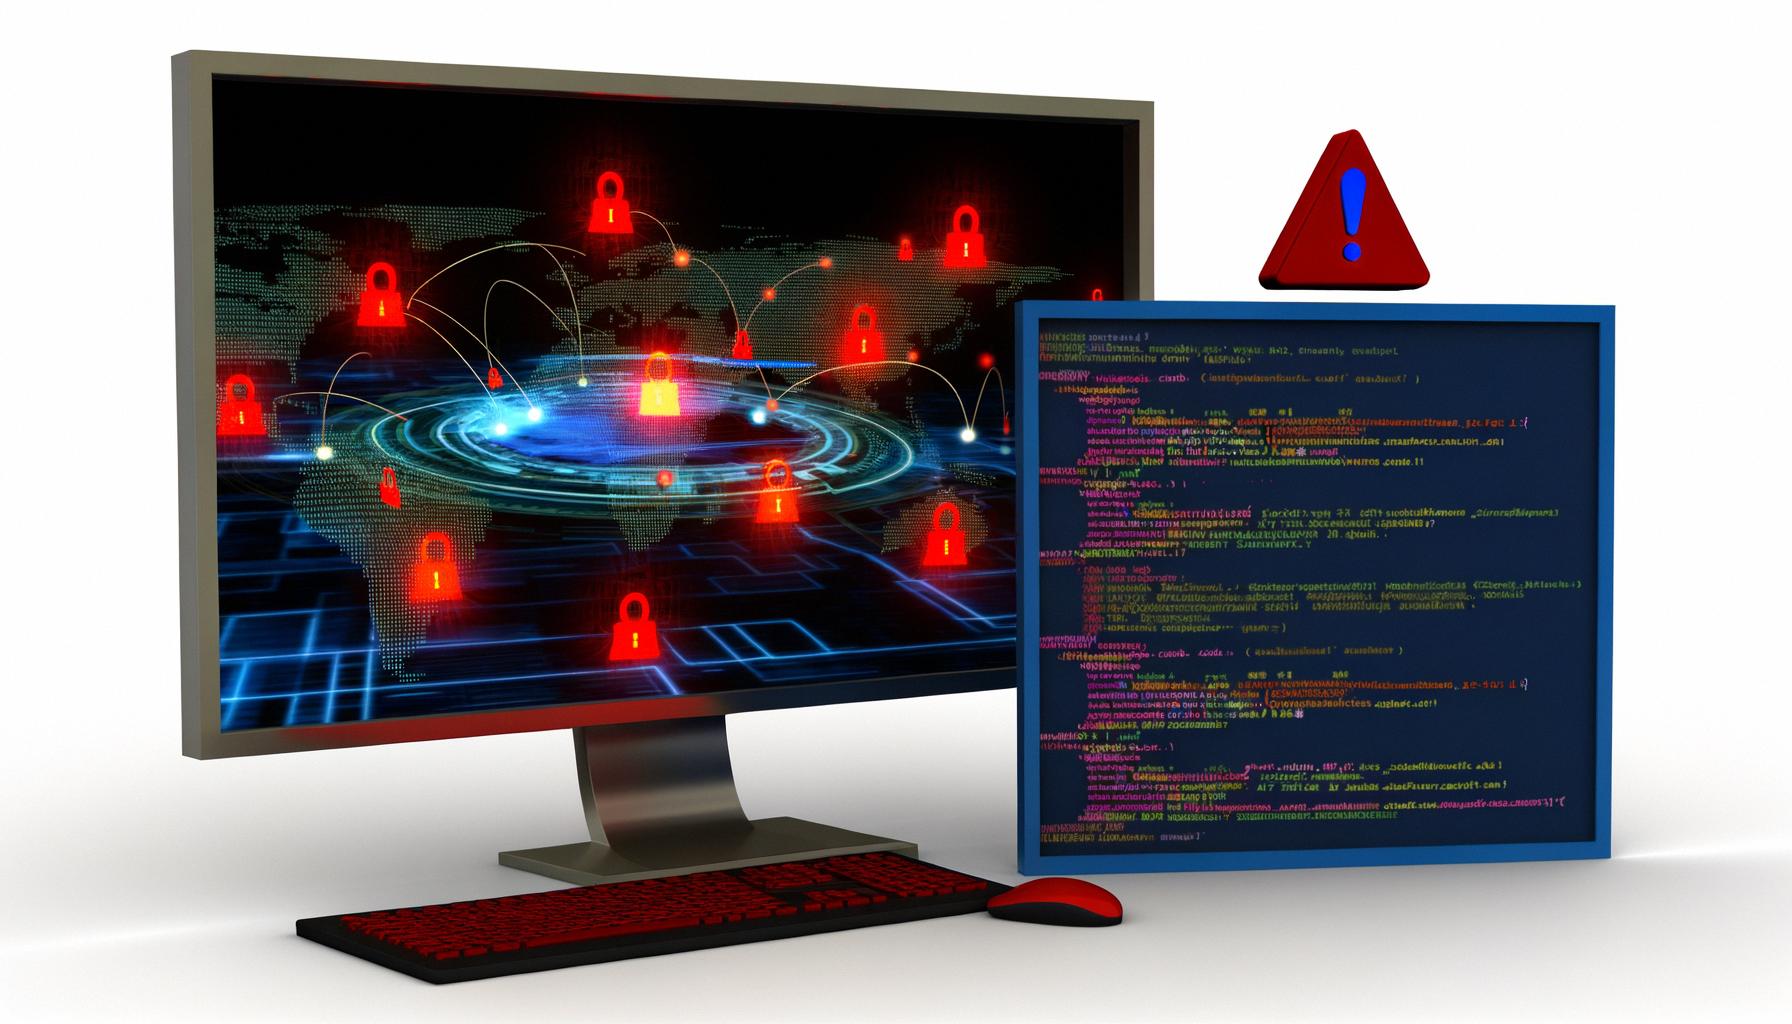 Critical vulnerabilities in popular software could compromise data security.